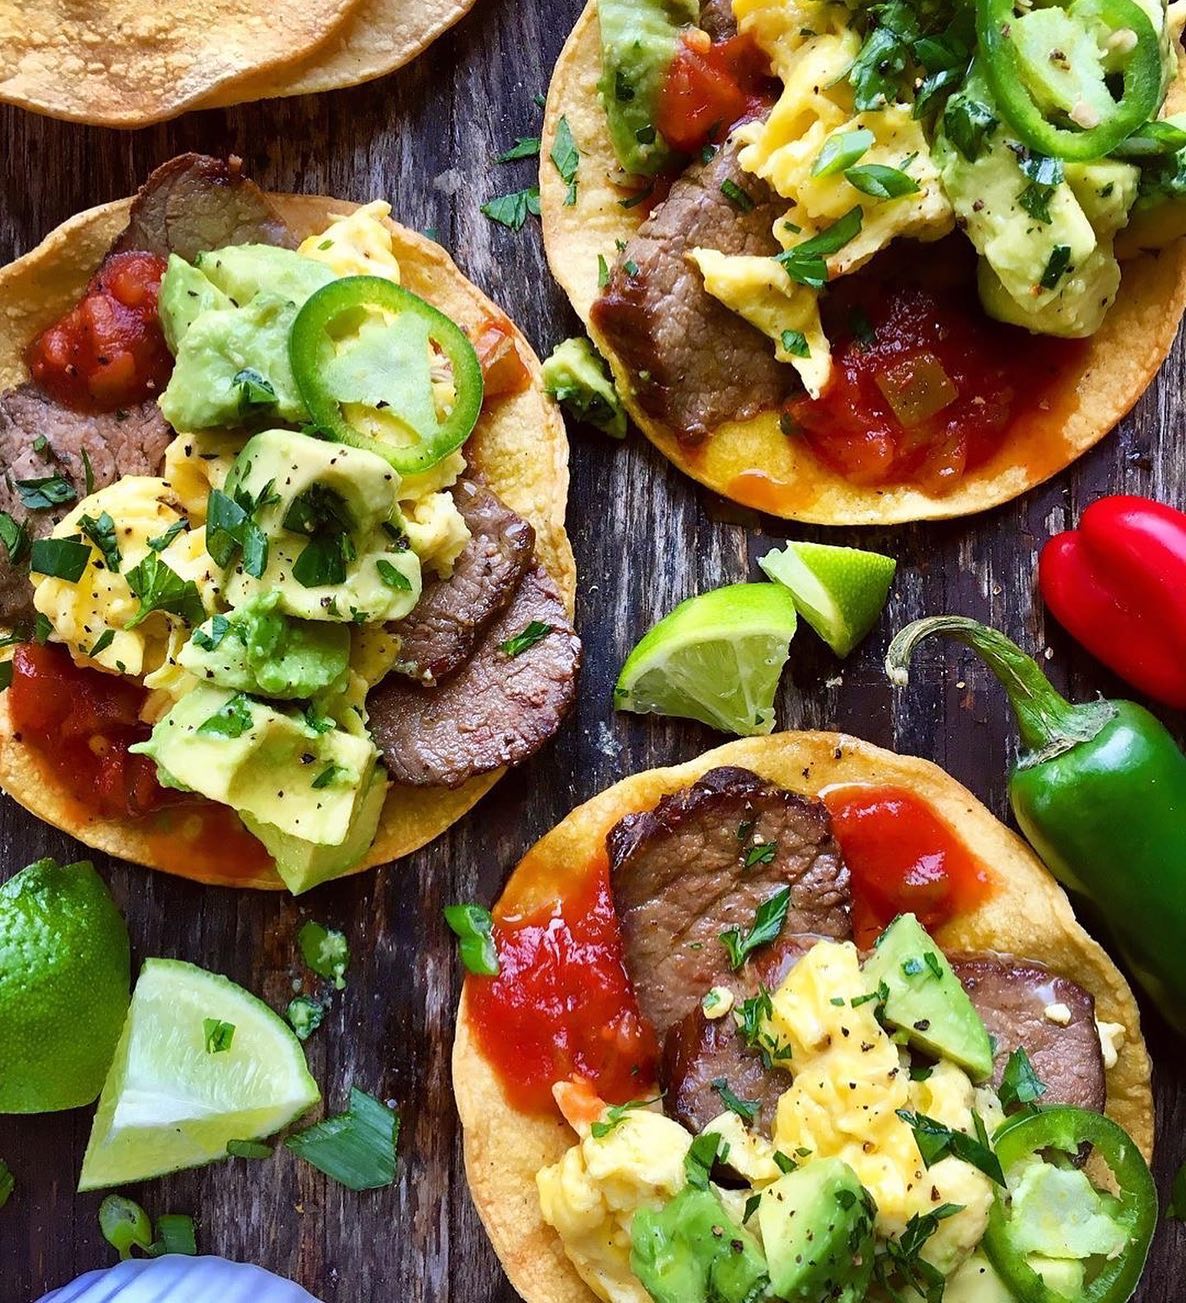 Great idea from @dianemorrisey When last nights grilled London broil turns into this mornings Breakfast Tostadas 👍
.
Food tip 101, when you grill steak at night, grill some extra to ensure there are leftovers for the next day!  Nothing like pairing steak with eggs, avocado and salsa for and epic breakfast!
:
:
:
:
Steak and Soft-Scrambled Egg Tostadas with Avocado and Salsa over baked Tostada Shells
:
:
:
To make the baked tostada shells:
6 corn tortillas
olive oil
.
Preheat the oven to 350F.
Spread out the corn tortillas on a baking sheet.  Brush approximately  a tsp of oil on one side of tortilla and flip over and brush the same on the second side.
Bake the first side in the oven for 4 minutes.  Flip the tortillas and bake as for an additional 4 minutes or until they are turning golden brown. 
Top and eat 
:
:
:
:
:
:
:
:
#thekitchn #food52 #feedfeed #wholefoods  #brunch #tostadas #steakandeggs #allrecipes  #buzzfeedtasty  #foodnetwork  #tohfoodie  #tasteofhome #epicurious #tastingtable #realsimple #todayfood #eatingwell #cookinglight  #bonappetit #makesmewhole #huffposttaste #buzzfeedfood #thenewhealthy  #cleaneating #healthyfoodshare #realfood #f52community